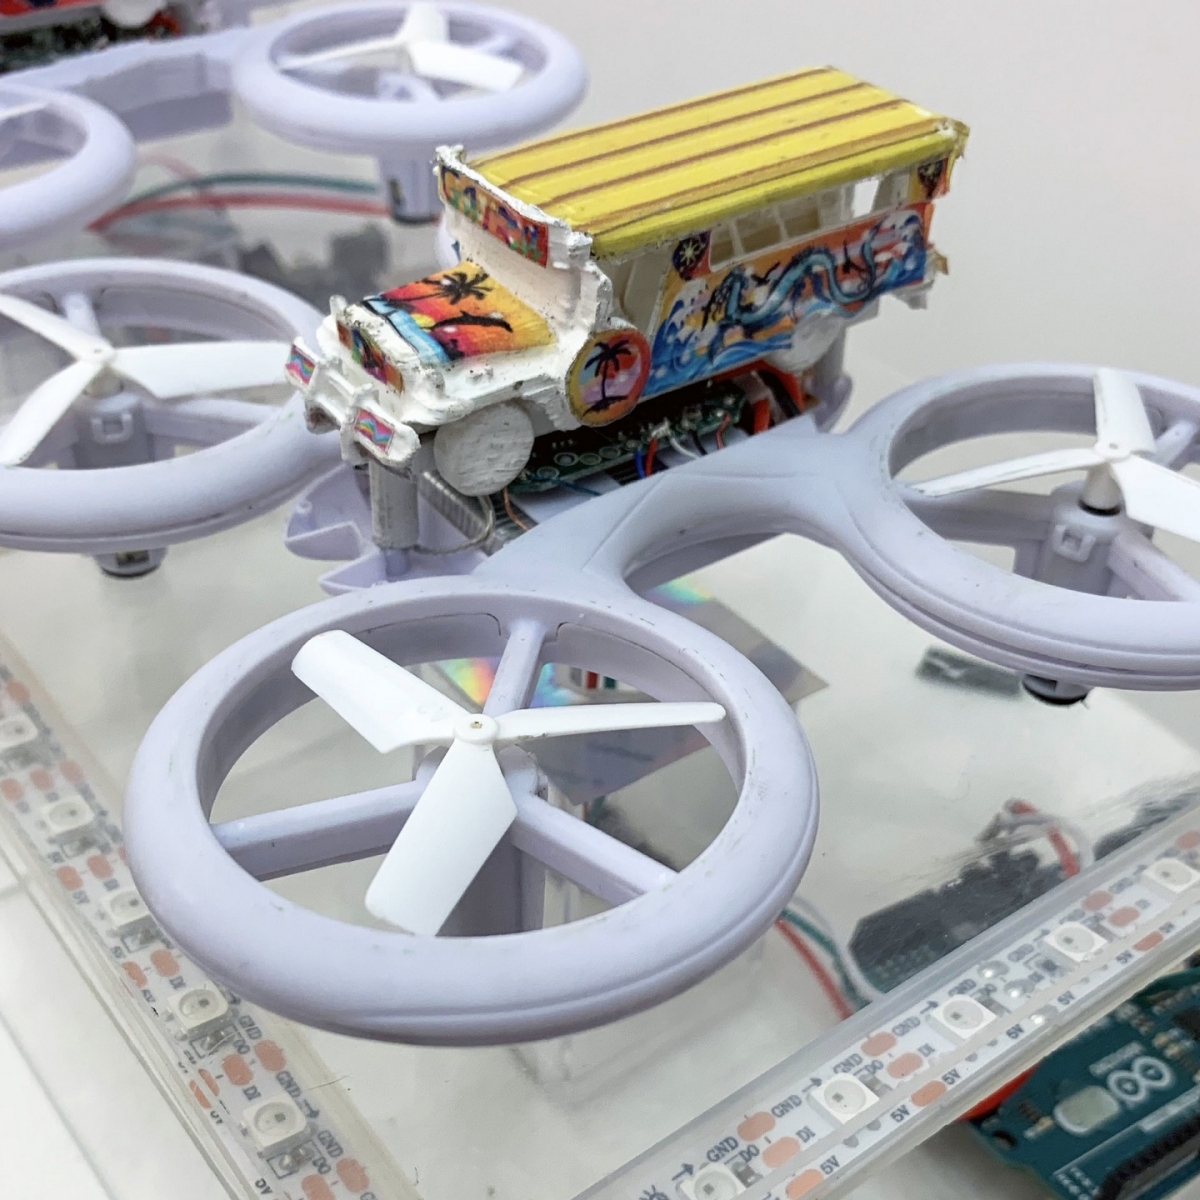 Image of drone with toy bus on top of it.